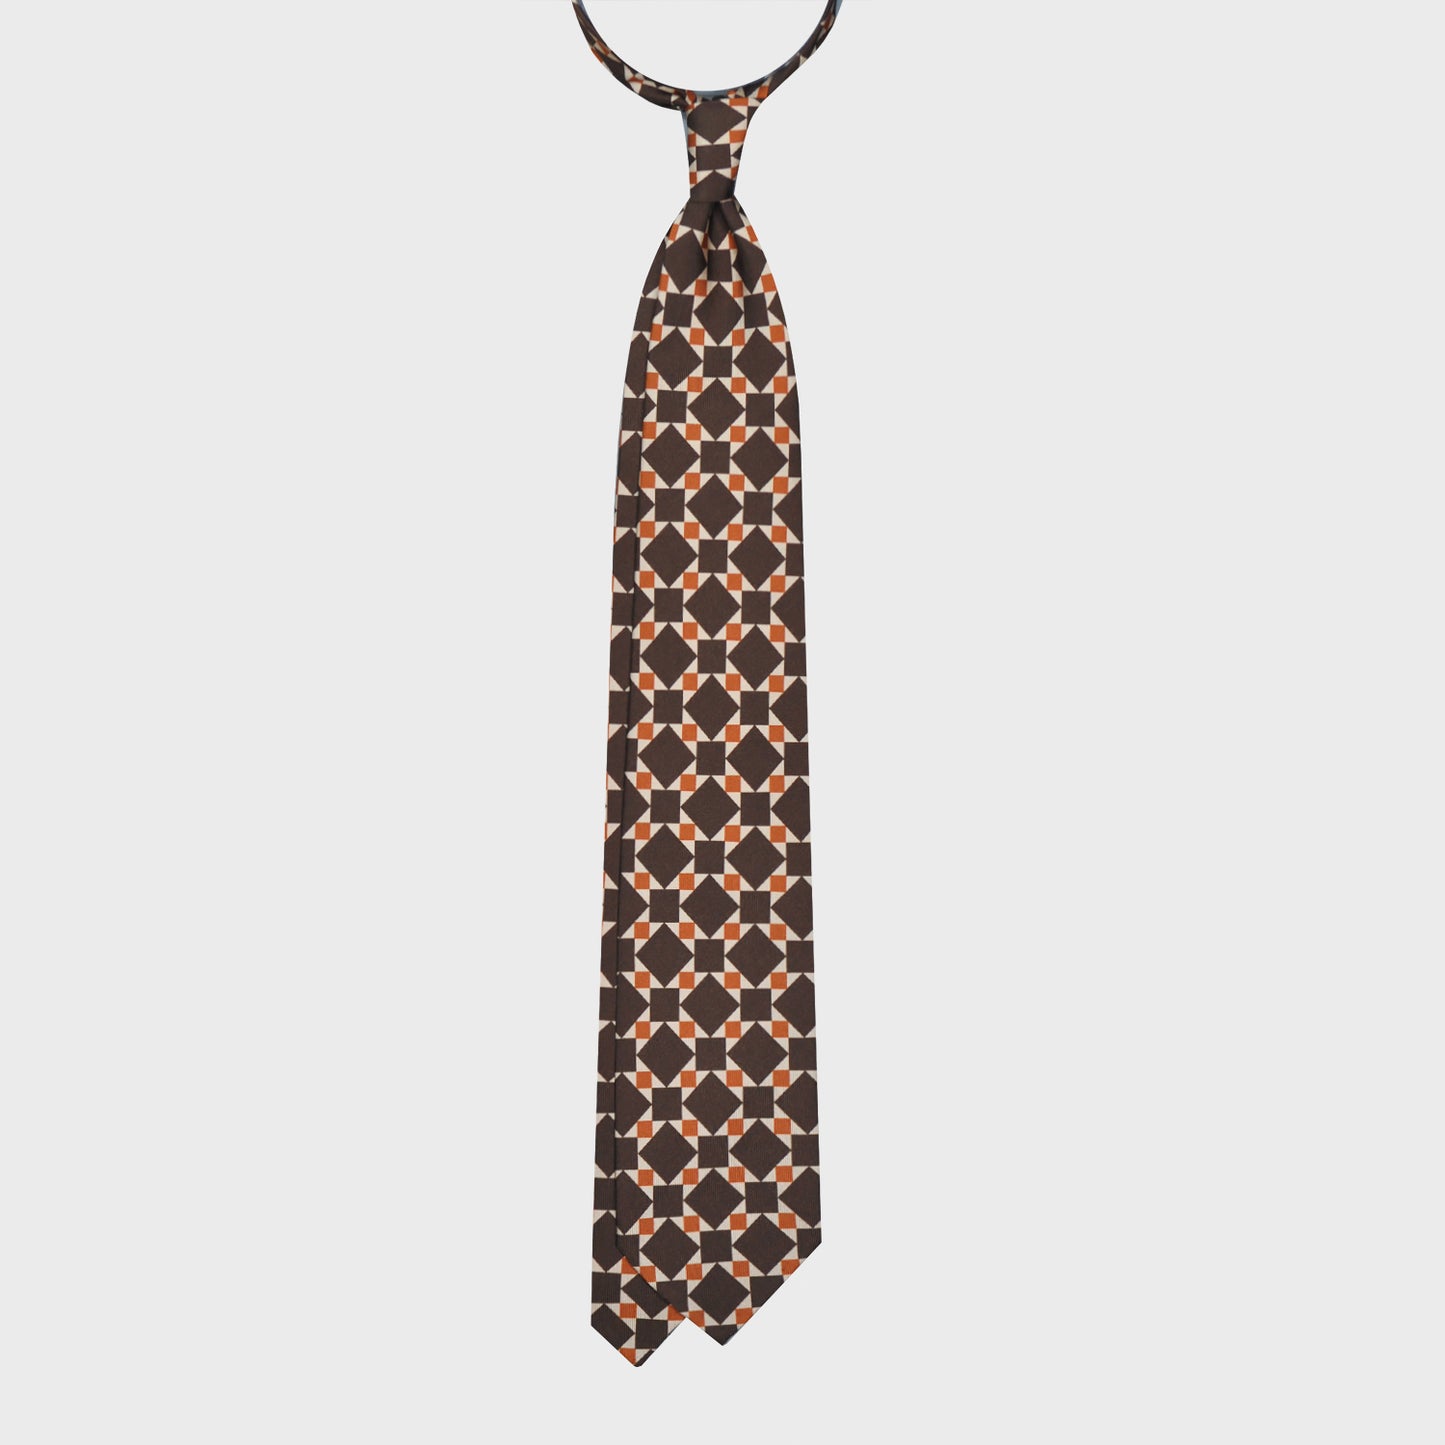 Exclusive silk tie made with finest Italian silk soft to the touch, sand beige background with coffee brown and orange mosaic pattern, unlined tie 3 folds, F.Marino Napoli ties exclusive for Wools Boutique Uomo